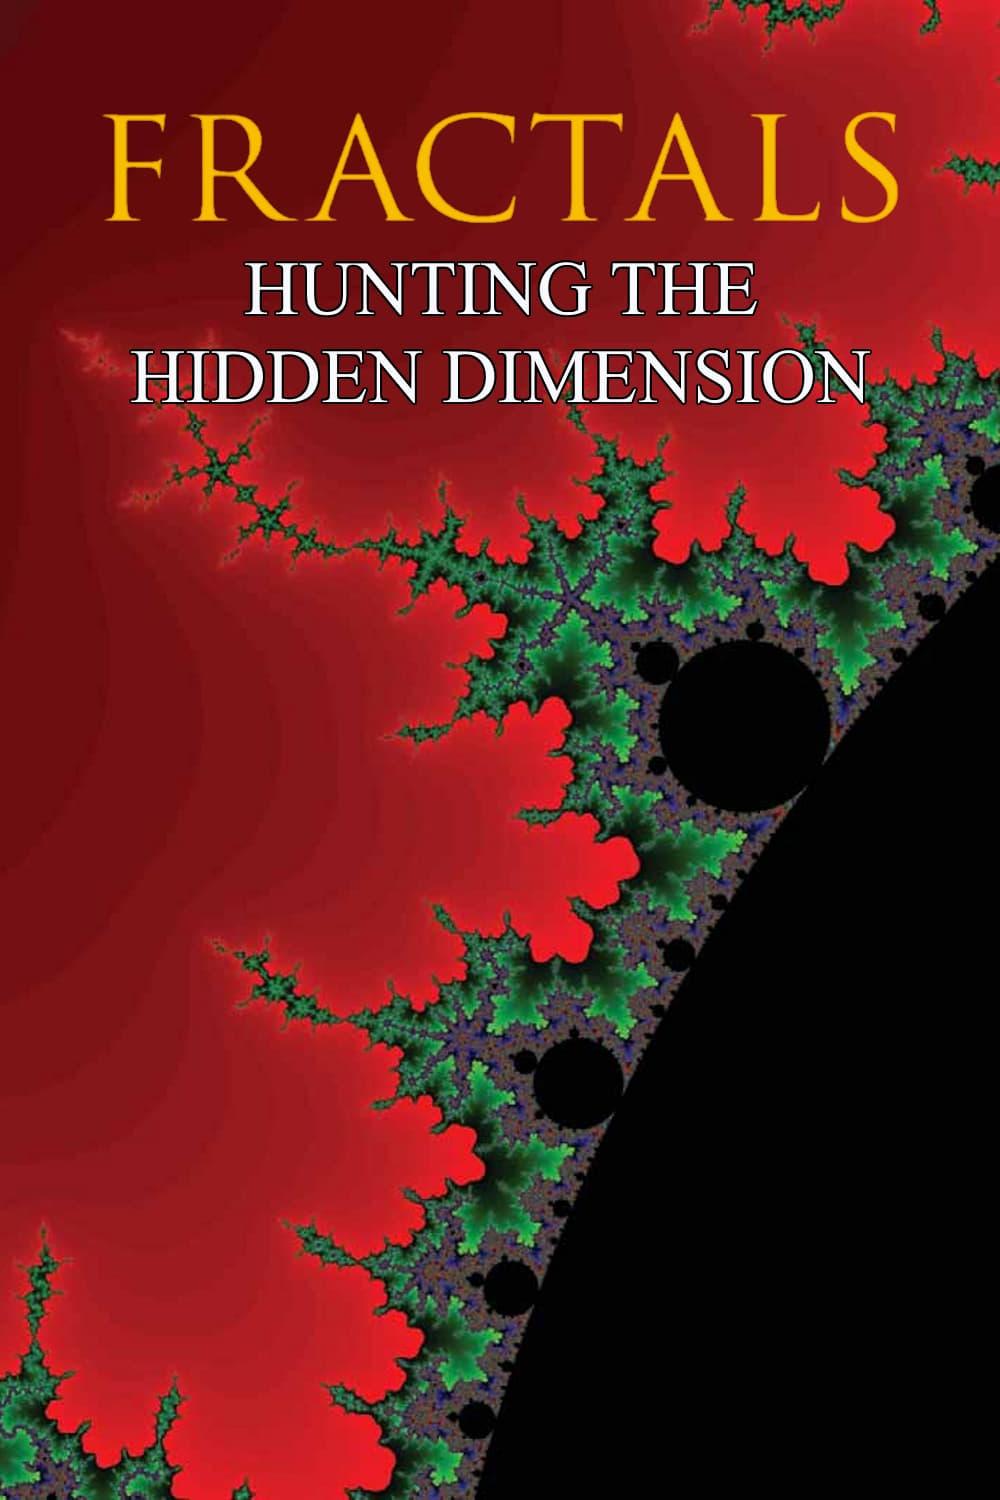 Fractals: Hunting the Hidden Dimension poster